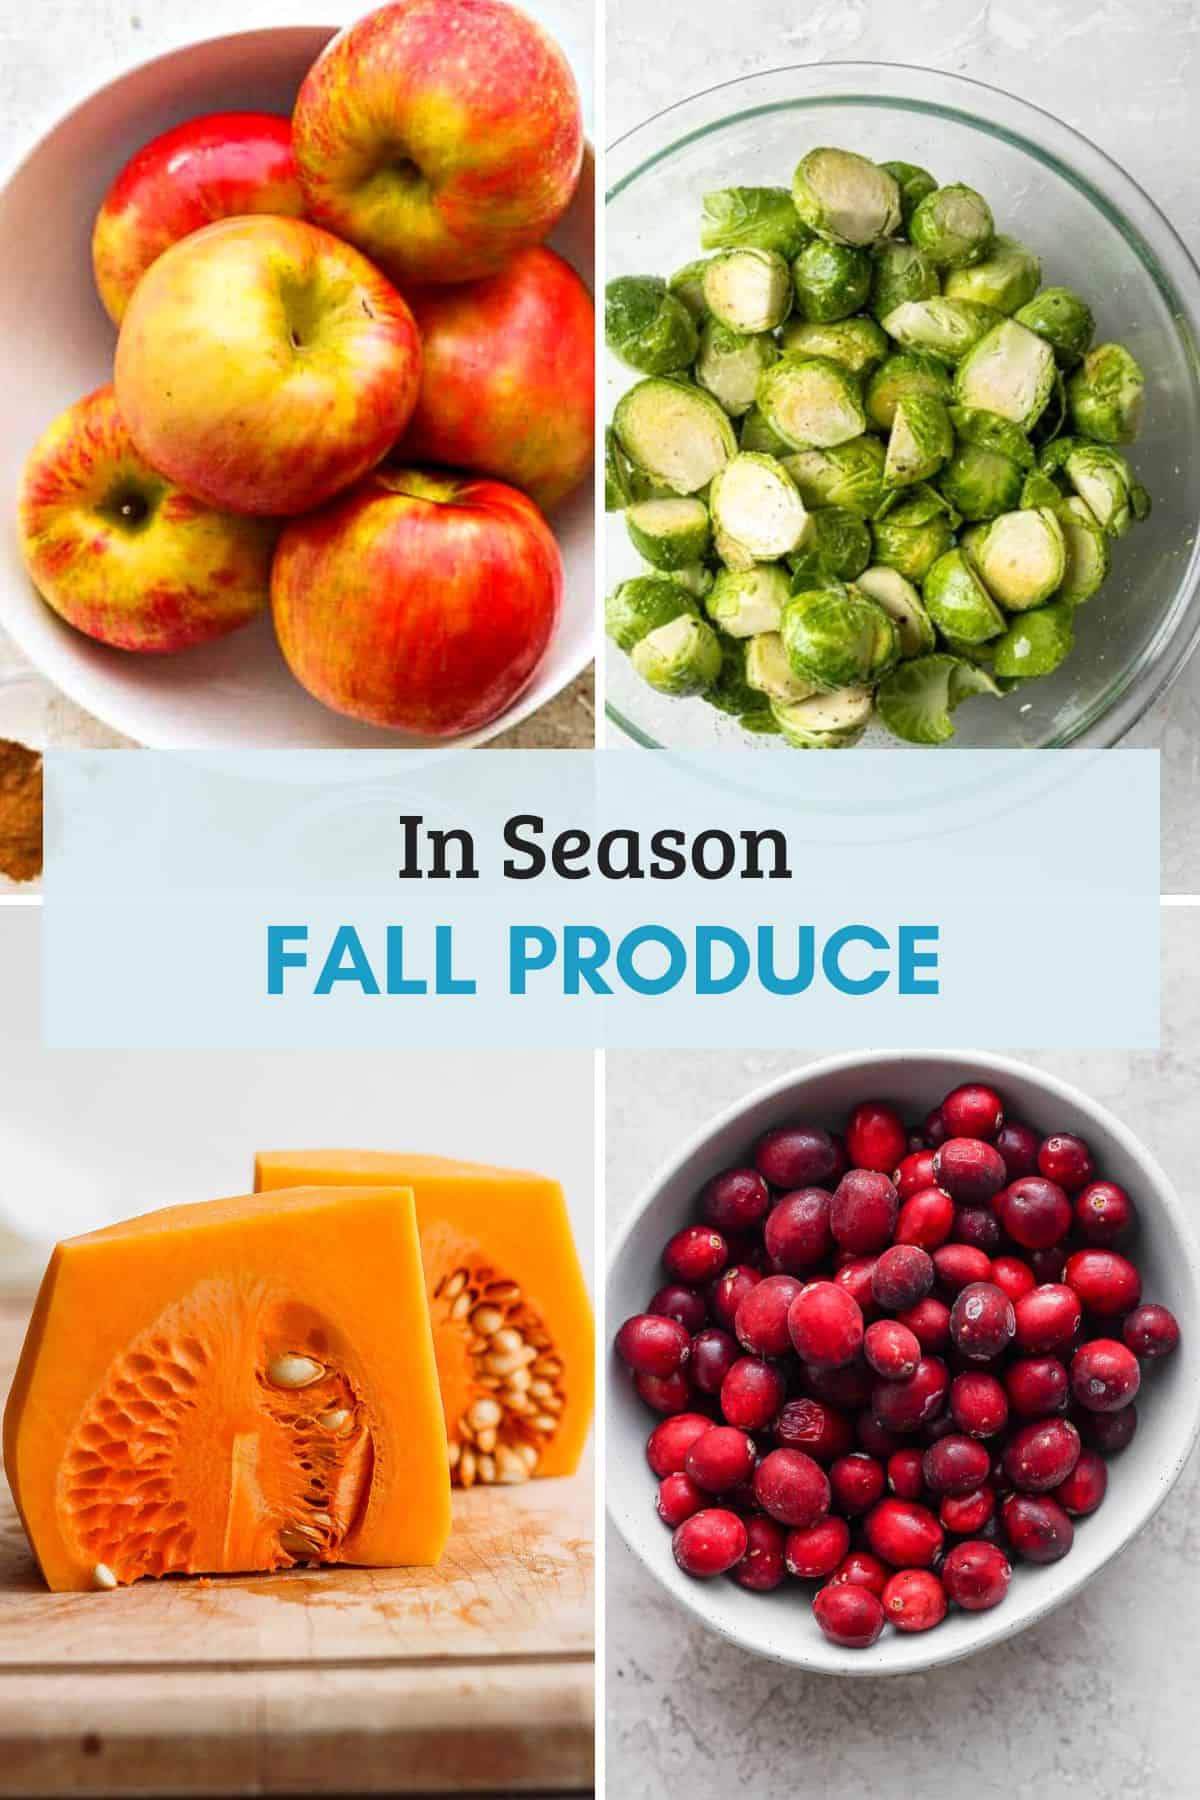 https://feelgoodfoodie.net/wp-content/uploads/2023/04/Ingredient_Guide_Fall_Produce_Featured.jpg